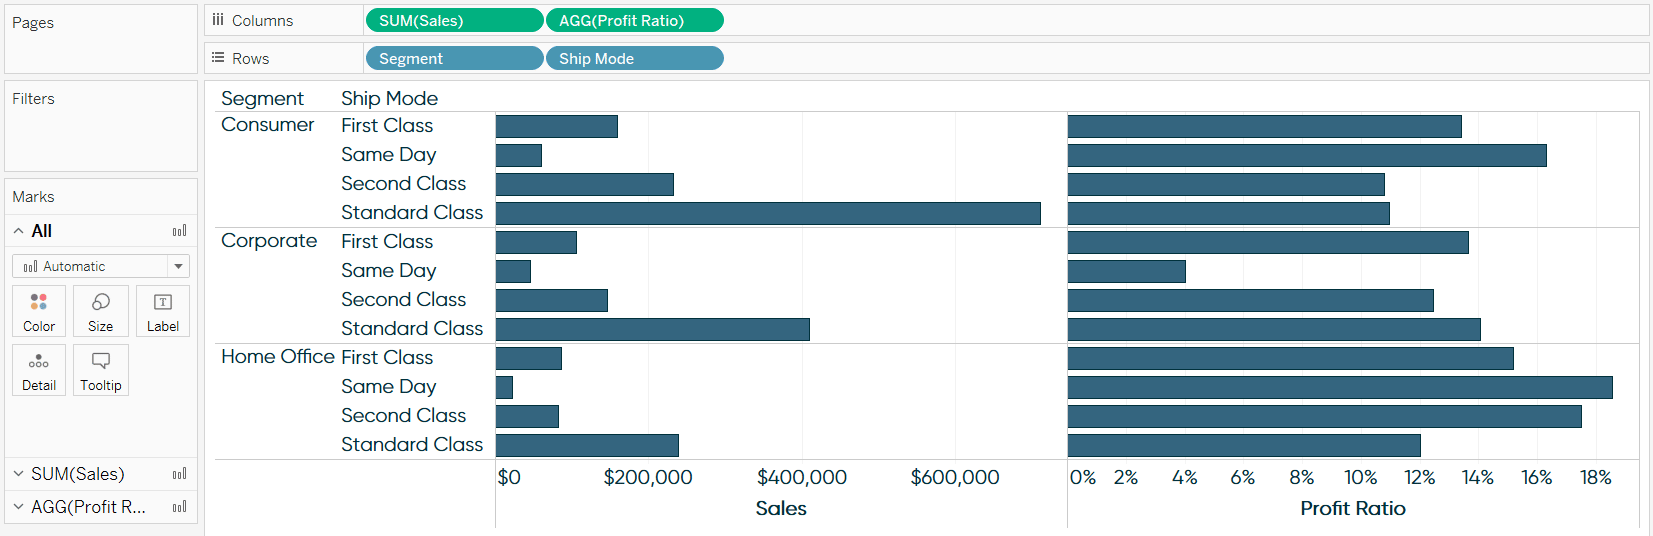 Tableau Sales and Profit Ratio by Segment and Ship Mode